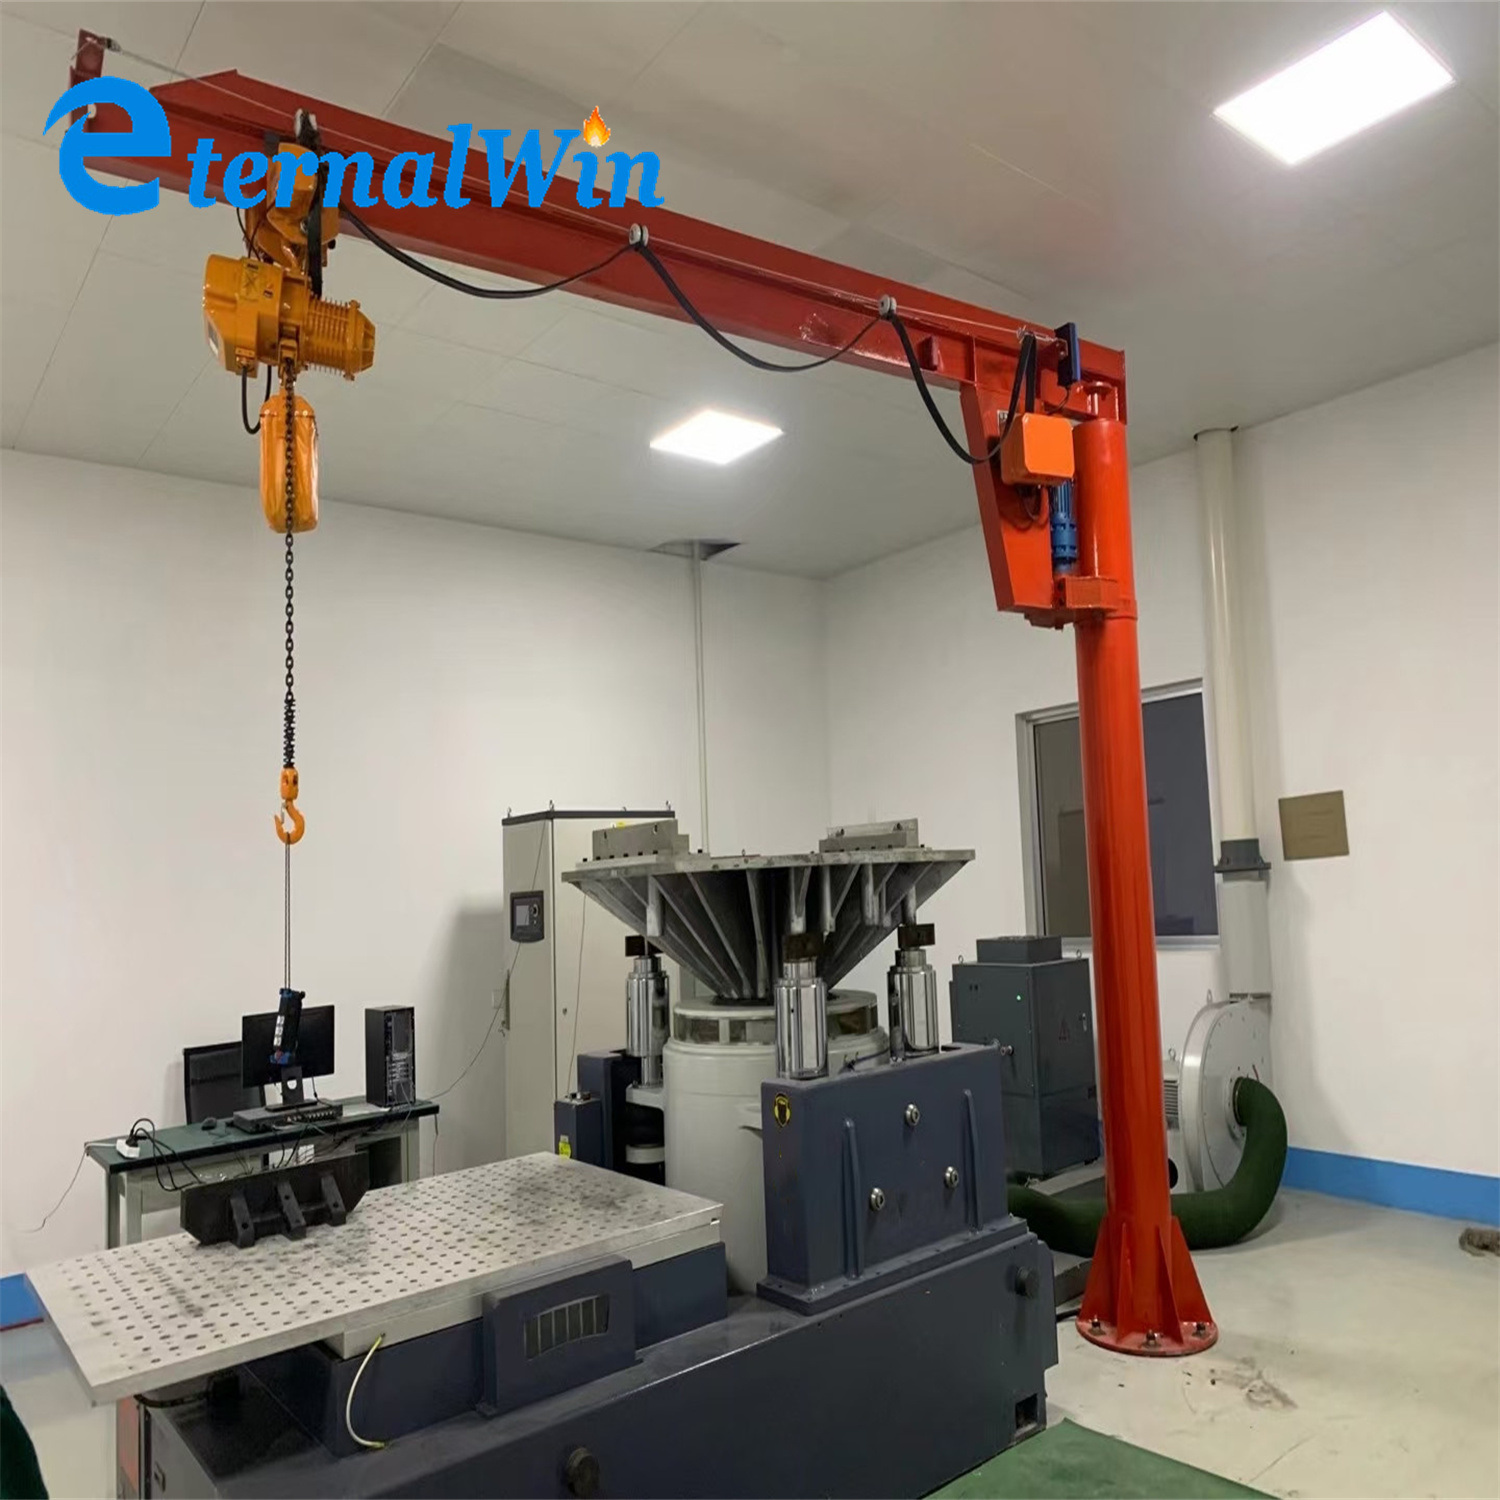 
                Workshop Use Foundation Mounted Cantilever Column Fixed Swing Slewing Jib Crane 3 Ton Cantilever Jib Crane Portal Cantilever Swing Arm Jib Crane for Sale
            